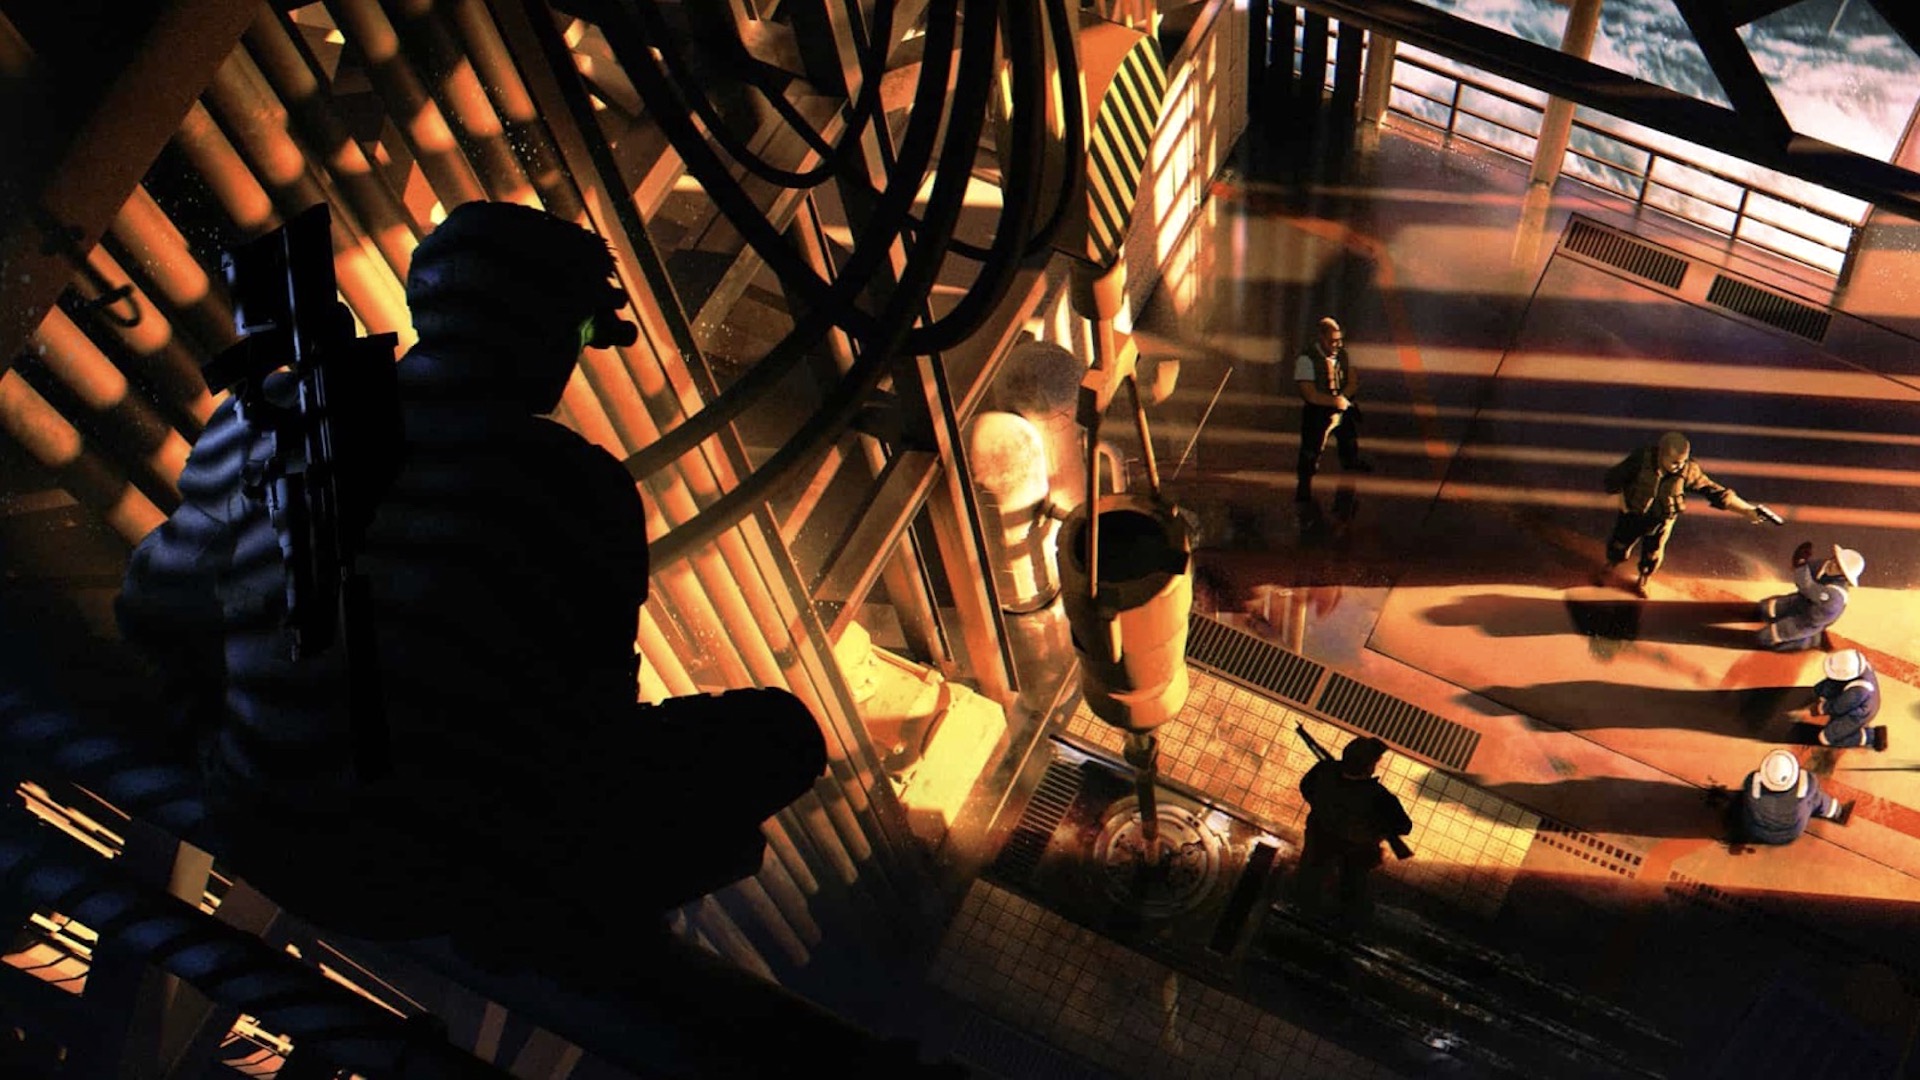 Sam Fisher is perched up high, looking at a group of armed men as they intimidate hostages on the ground below